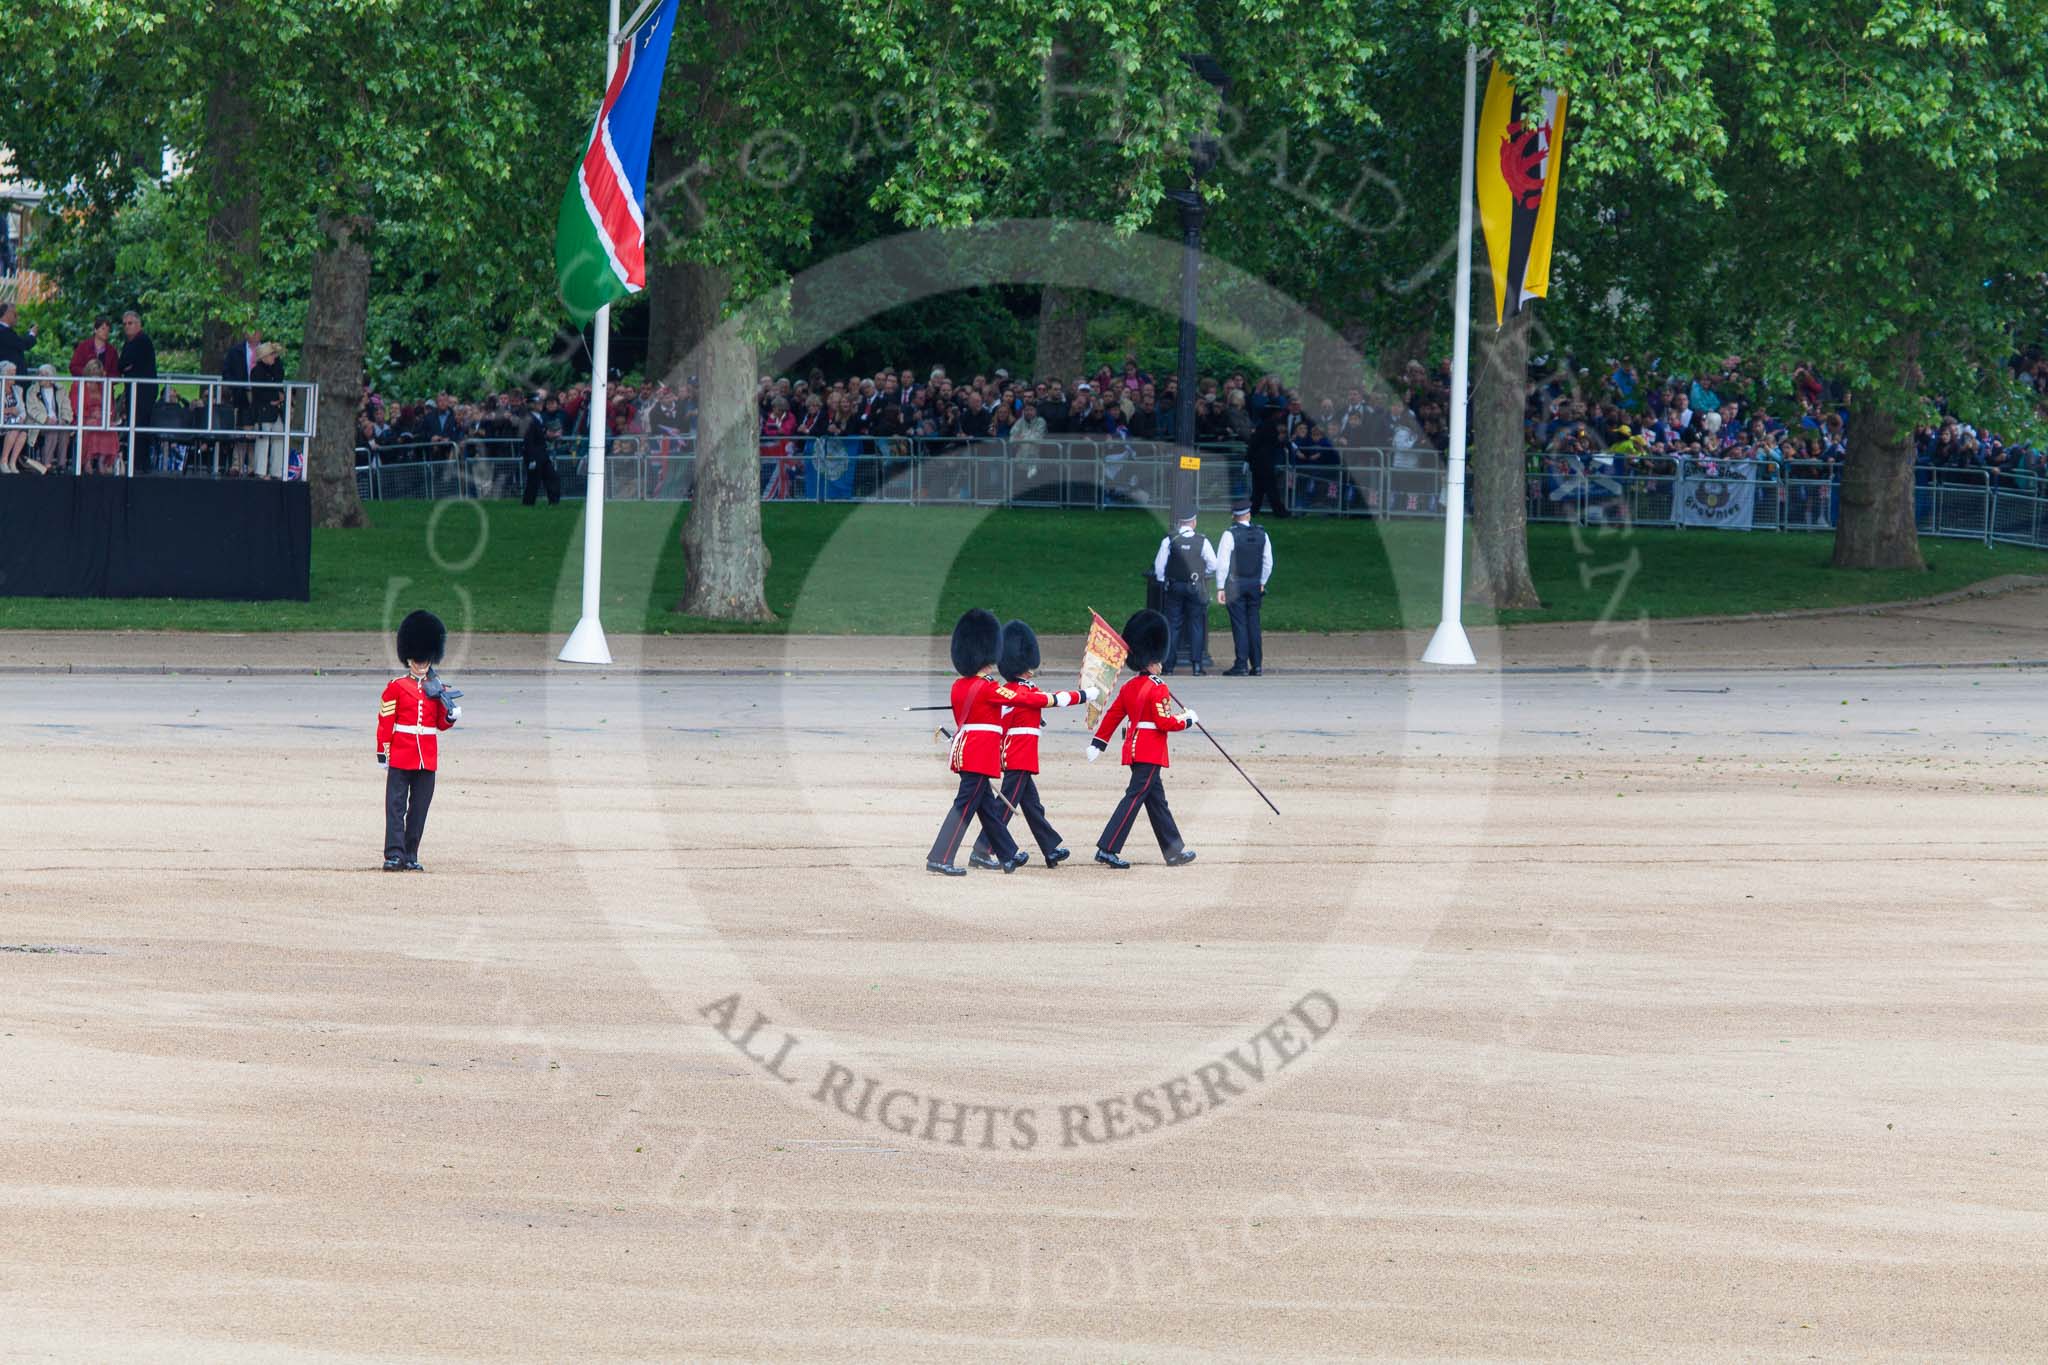 Trooping the Colour 2013: The Keepers of the Ground are all getting into position for their regiments that will arrive shortly. Image #60, 15 June 2013 10:16 Horse Guards Parade, London, UK